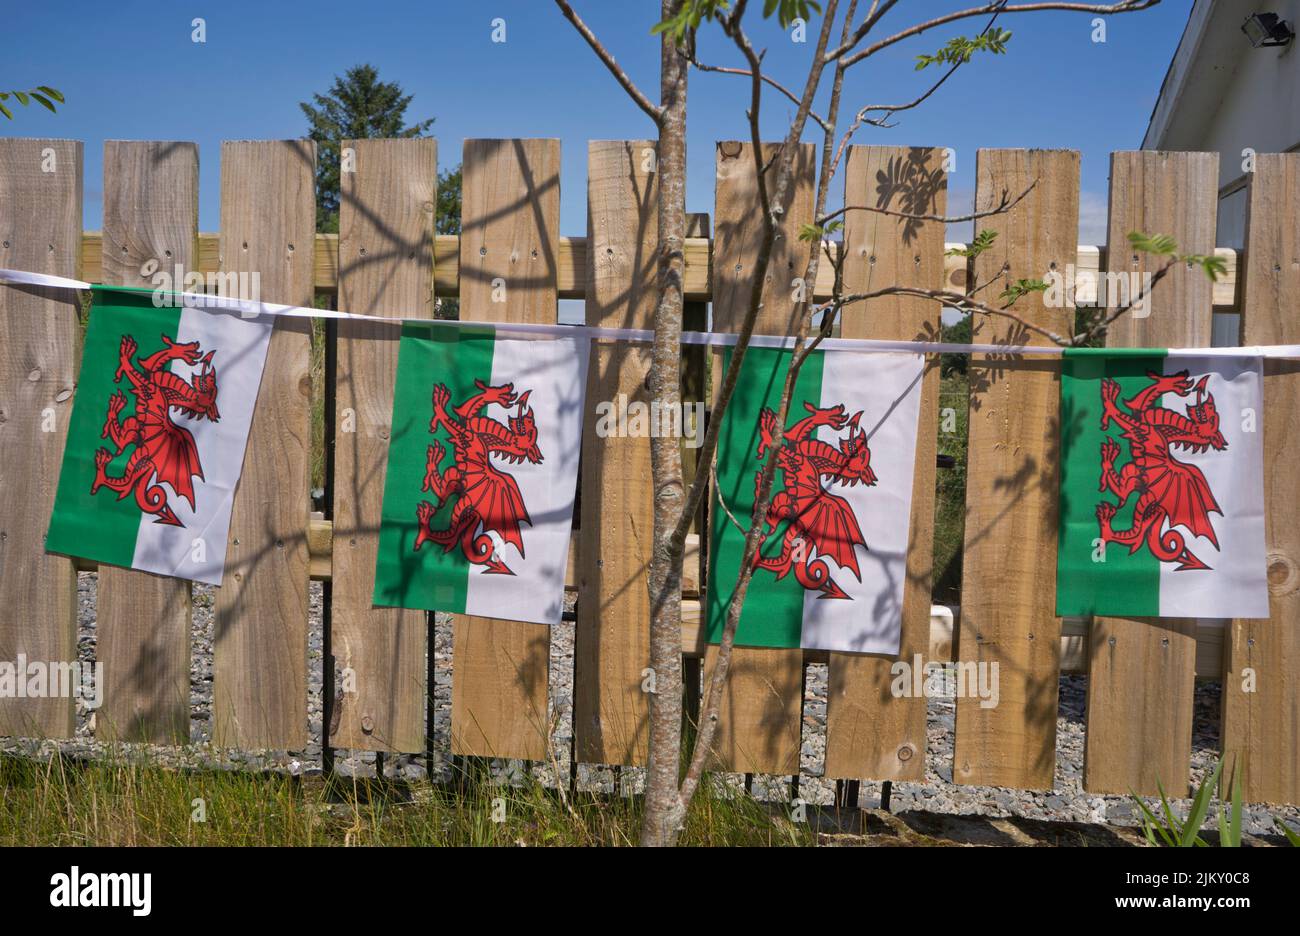 Local villages display Welsh flags and banners during the National Eisteddfod festival of Welsh culture and traditions in Tregaron,Ceredigion,Wales,UK Stock Photo